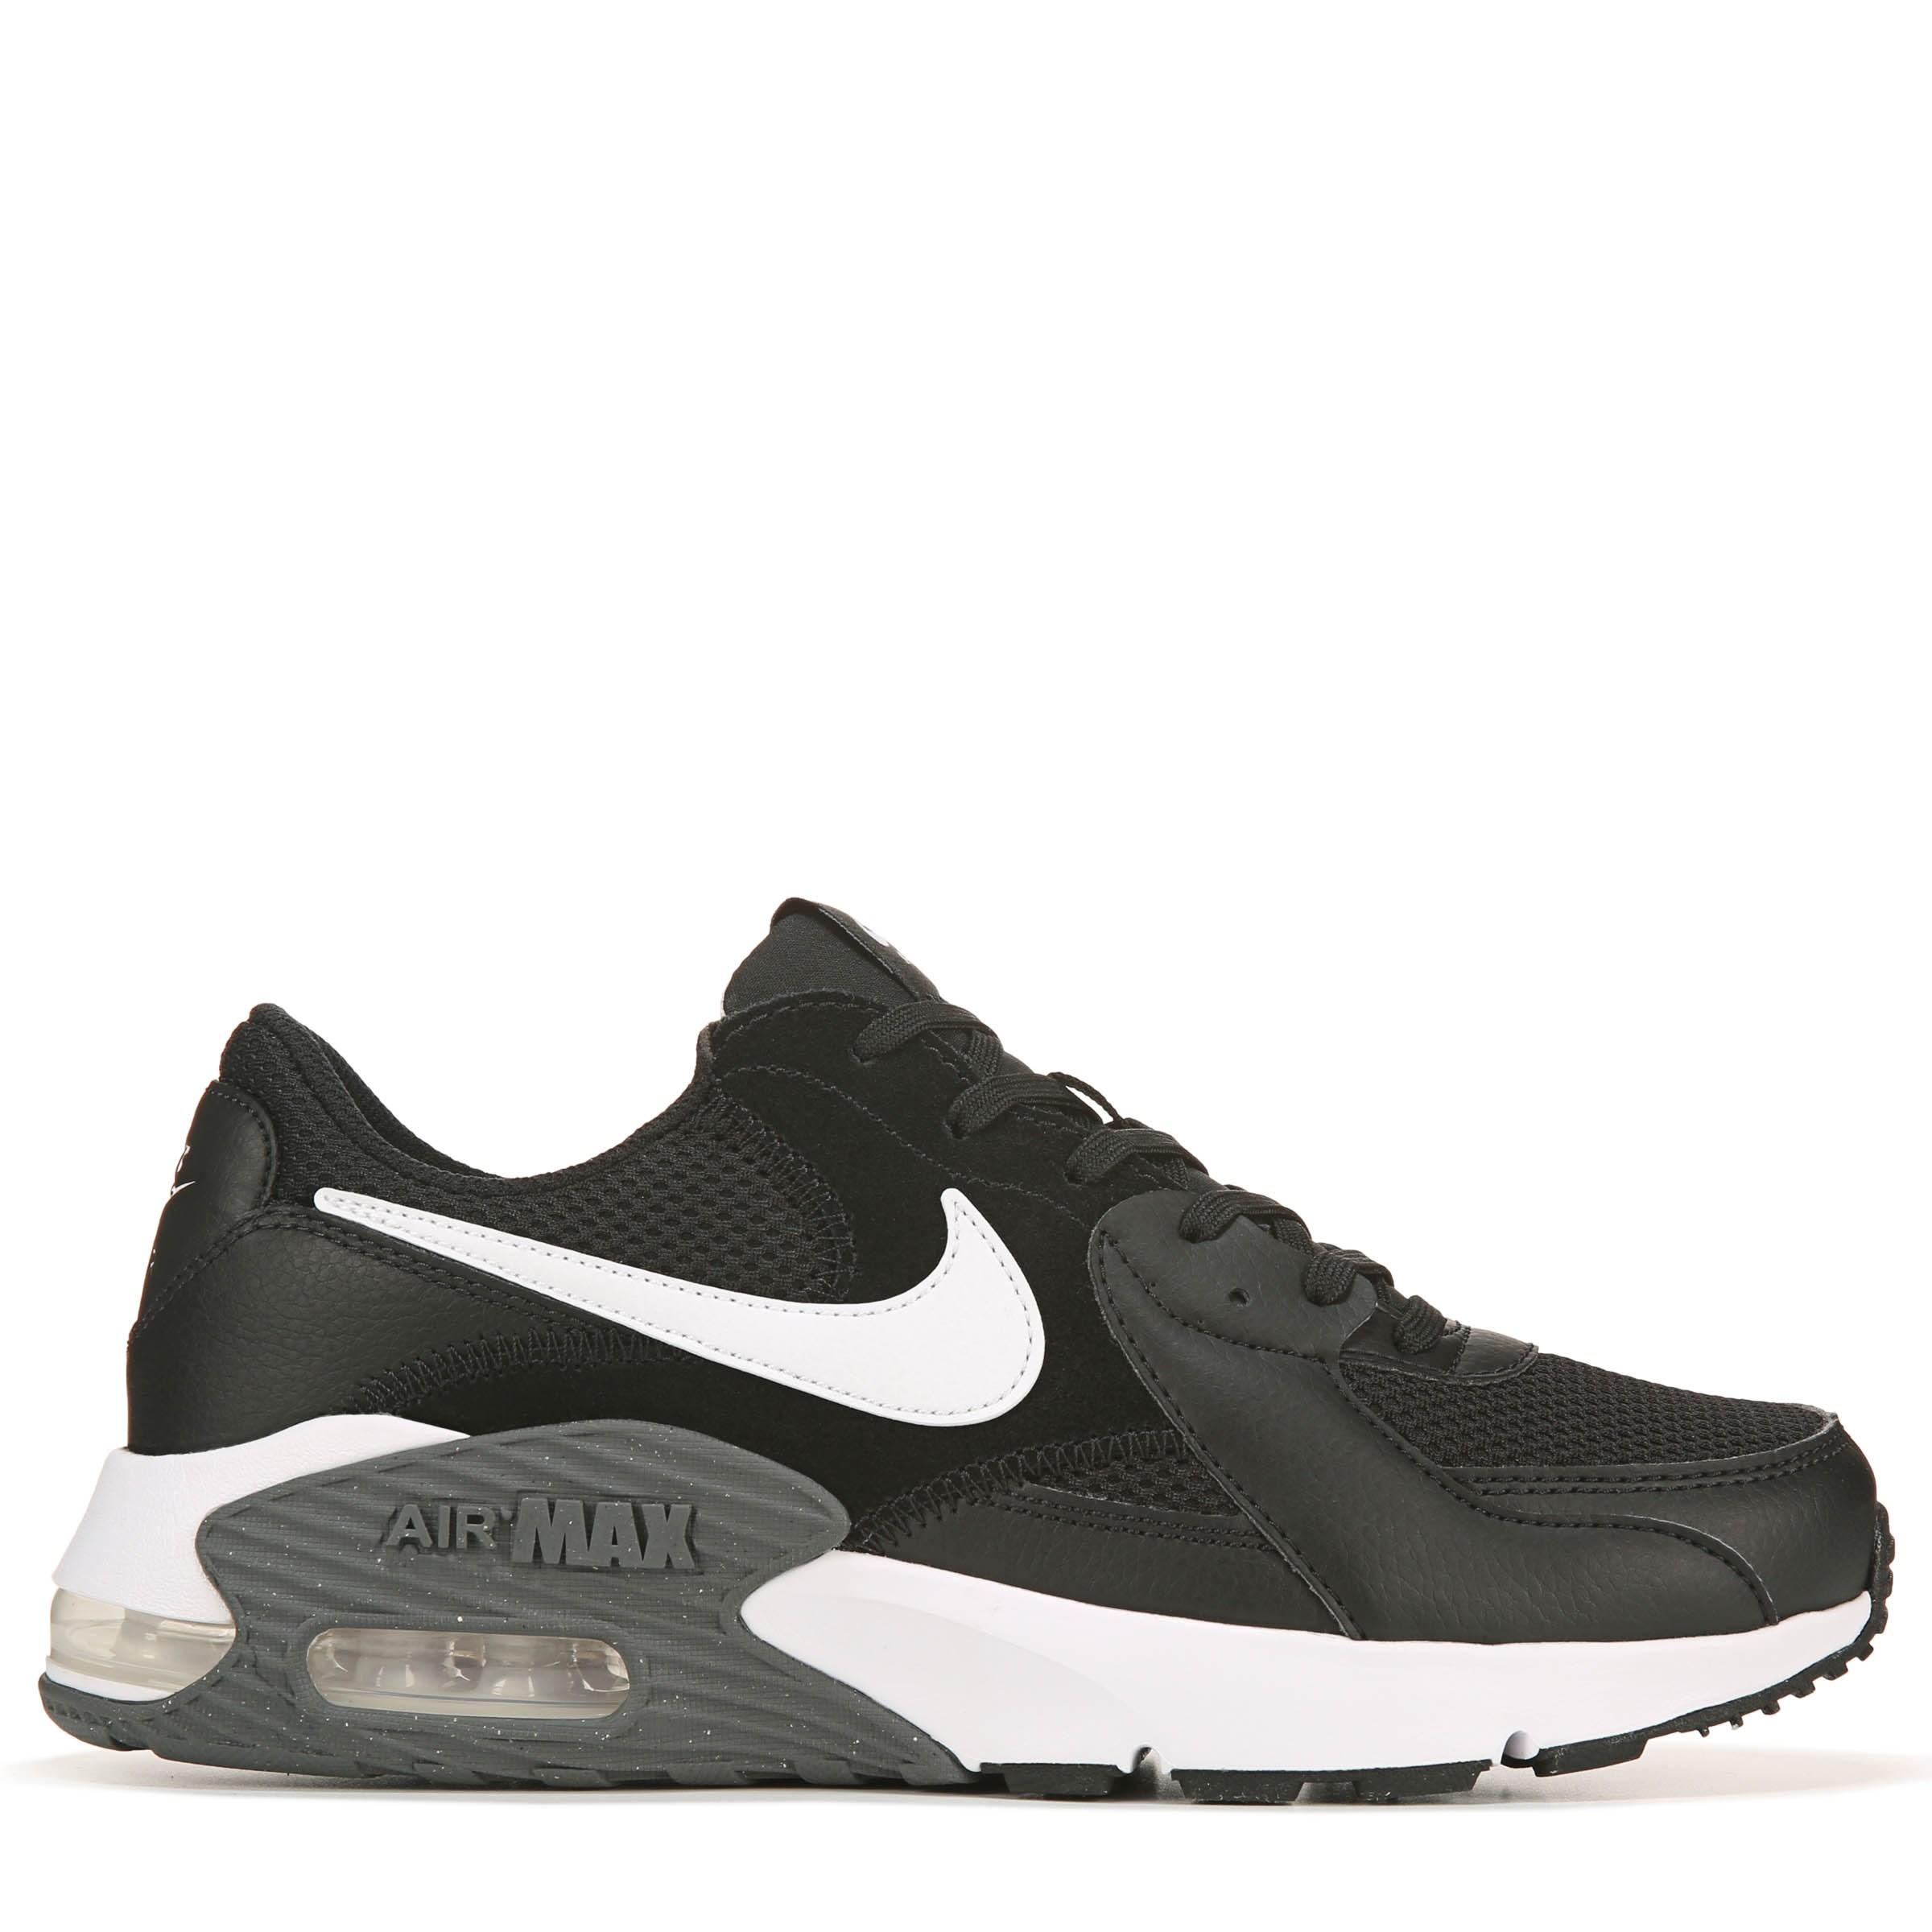 Nike Leather Air Max Excee Sneakers in Black/White (Black) for Men - Lyst